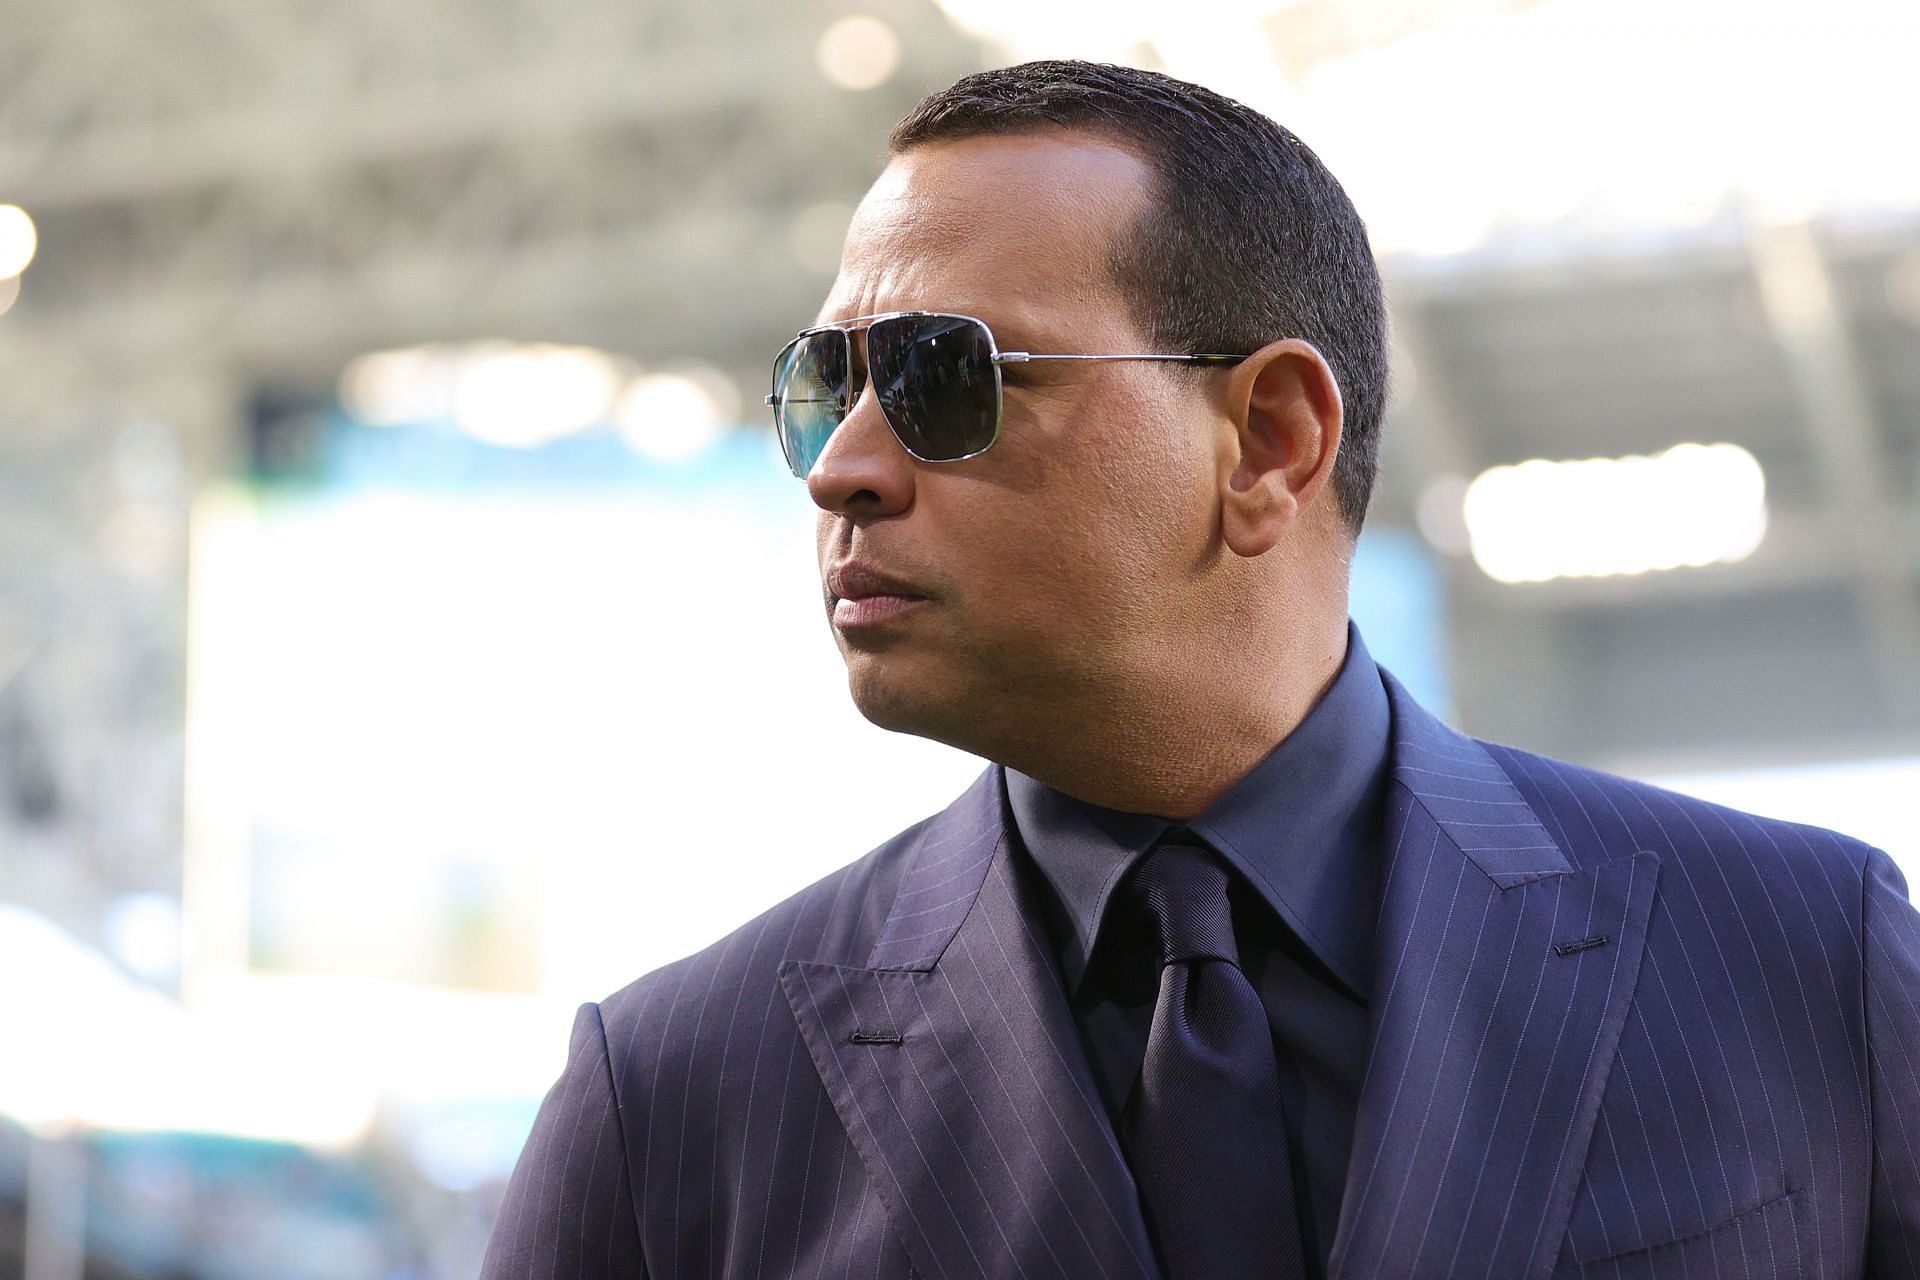 Super Bowl LIV - San Francisco 49ers v Kansas City Chiefs: MIAMI, FLORIDA - FEBRUARY 02: Former baseball player Alex Rodriguez looks on before Super Bowl LIV at Hard Rock Stadium on February 02, 2020, in Miami, Florida. (Photo by Maddie Meyer/Getty Images)